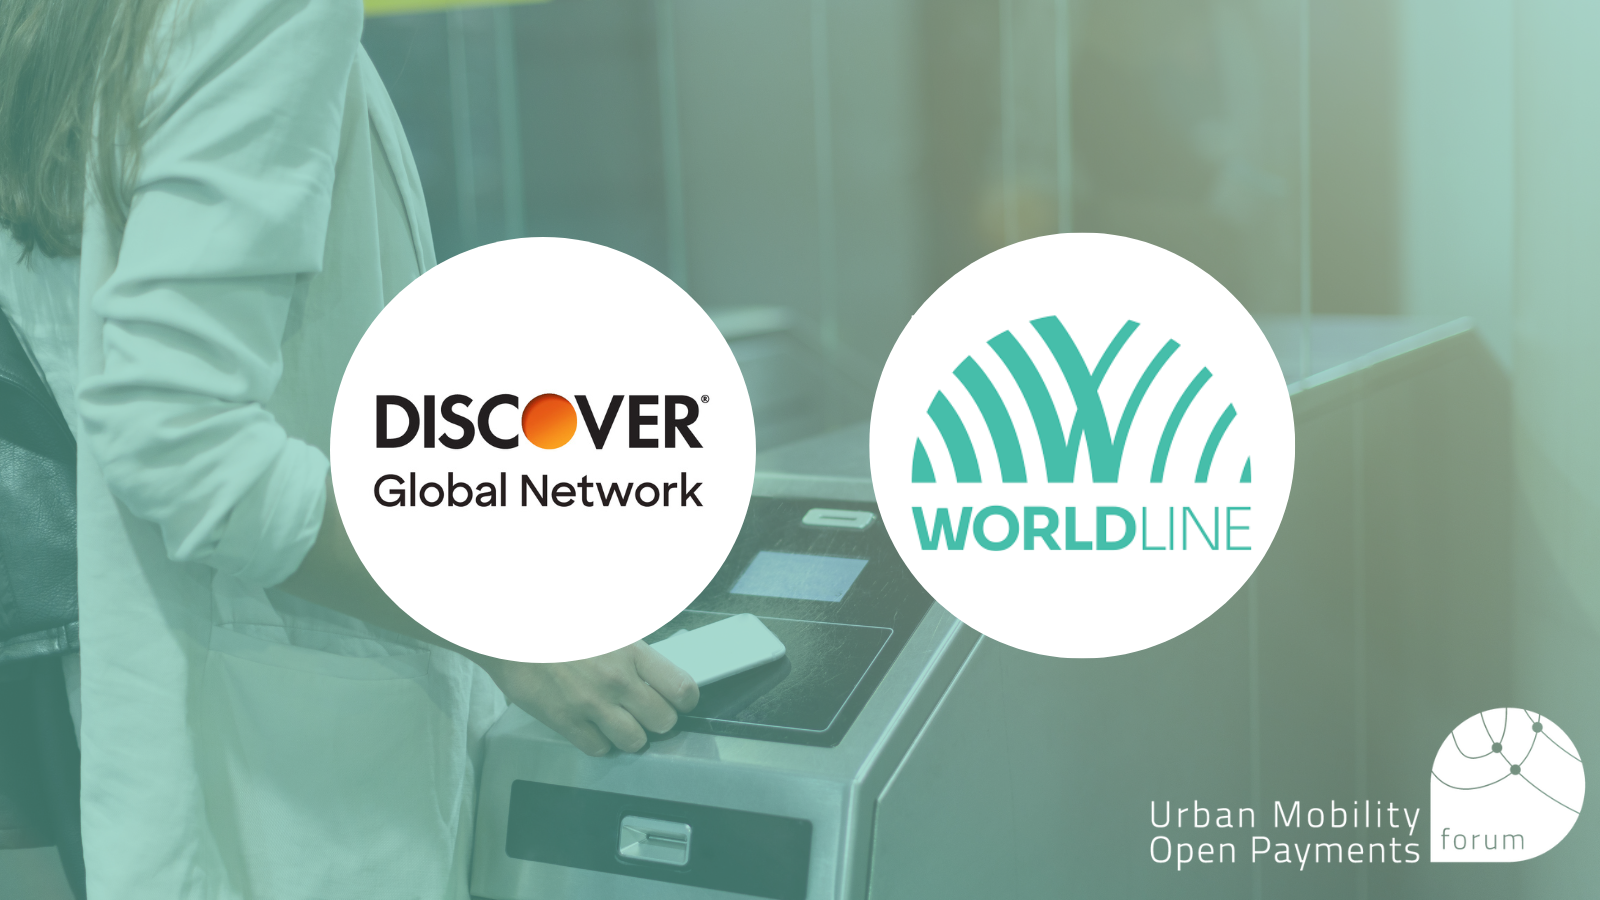 Open Payment Forum welcomes Discover Global Network and Worldline as new members